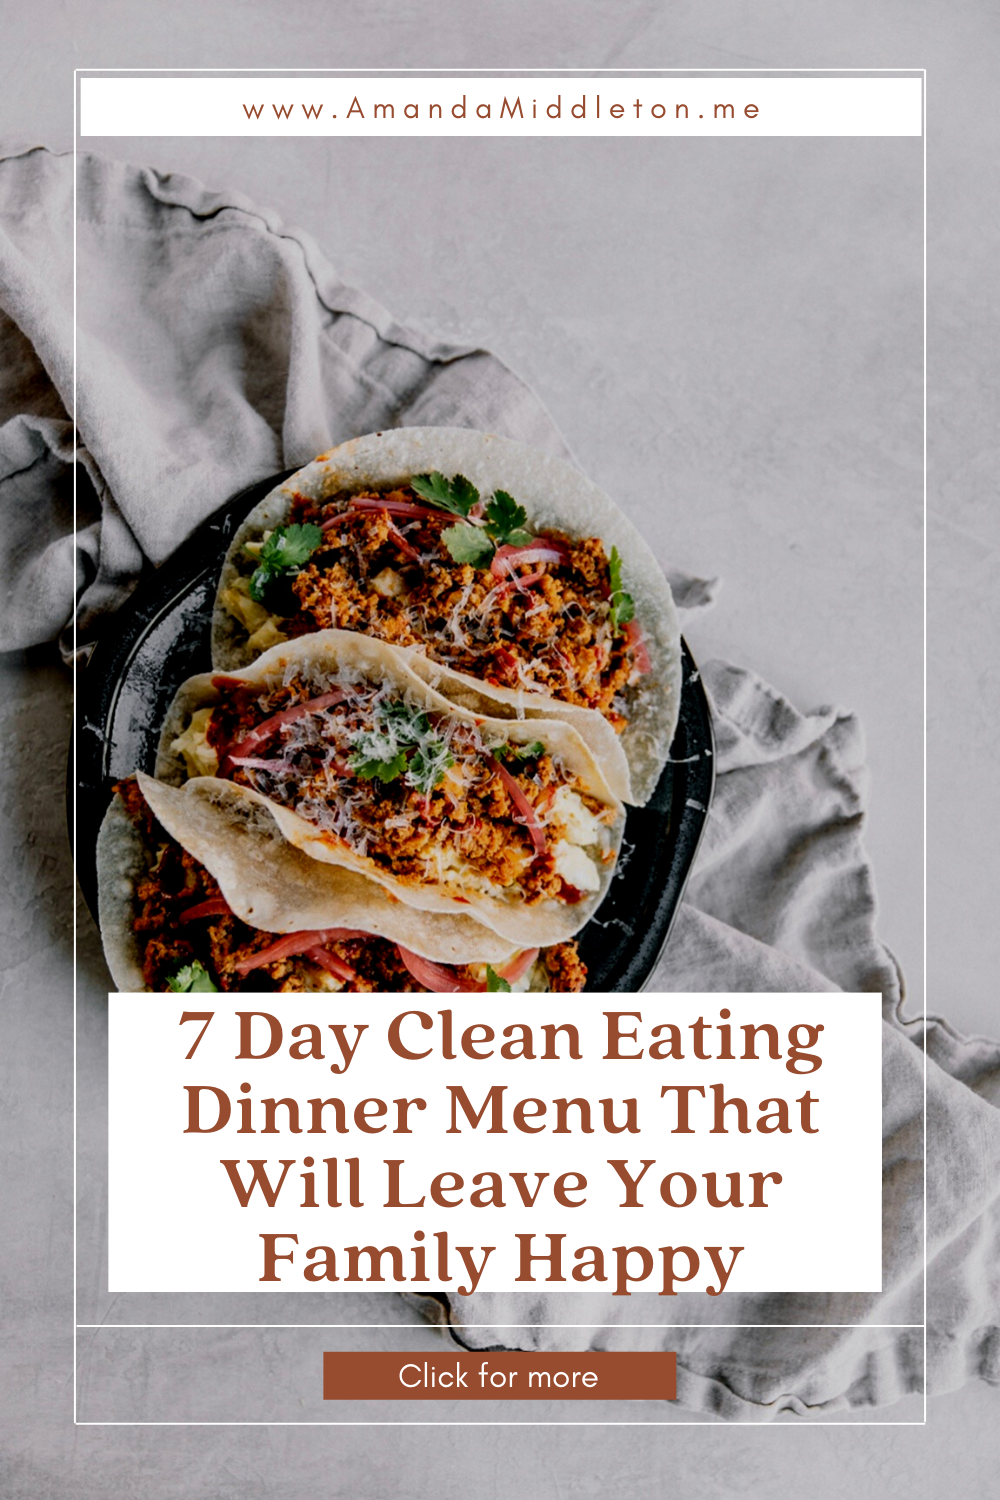 7 Day Clean Eating Dinner Menu That Will Leave Your Family Happy